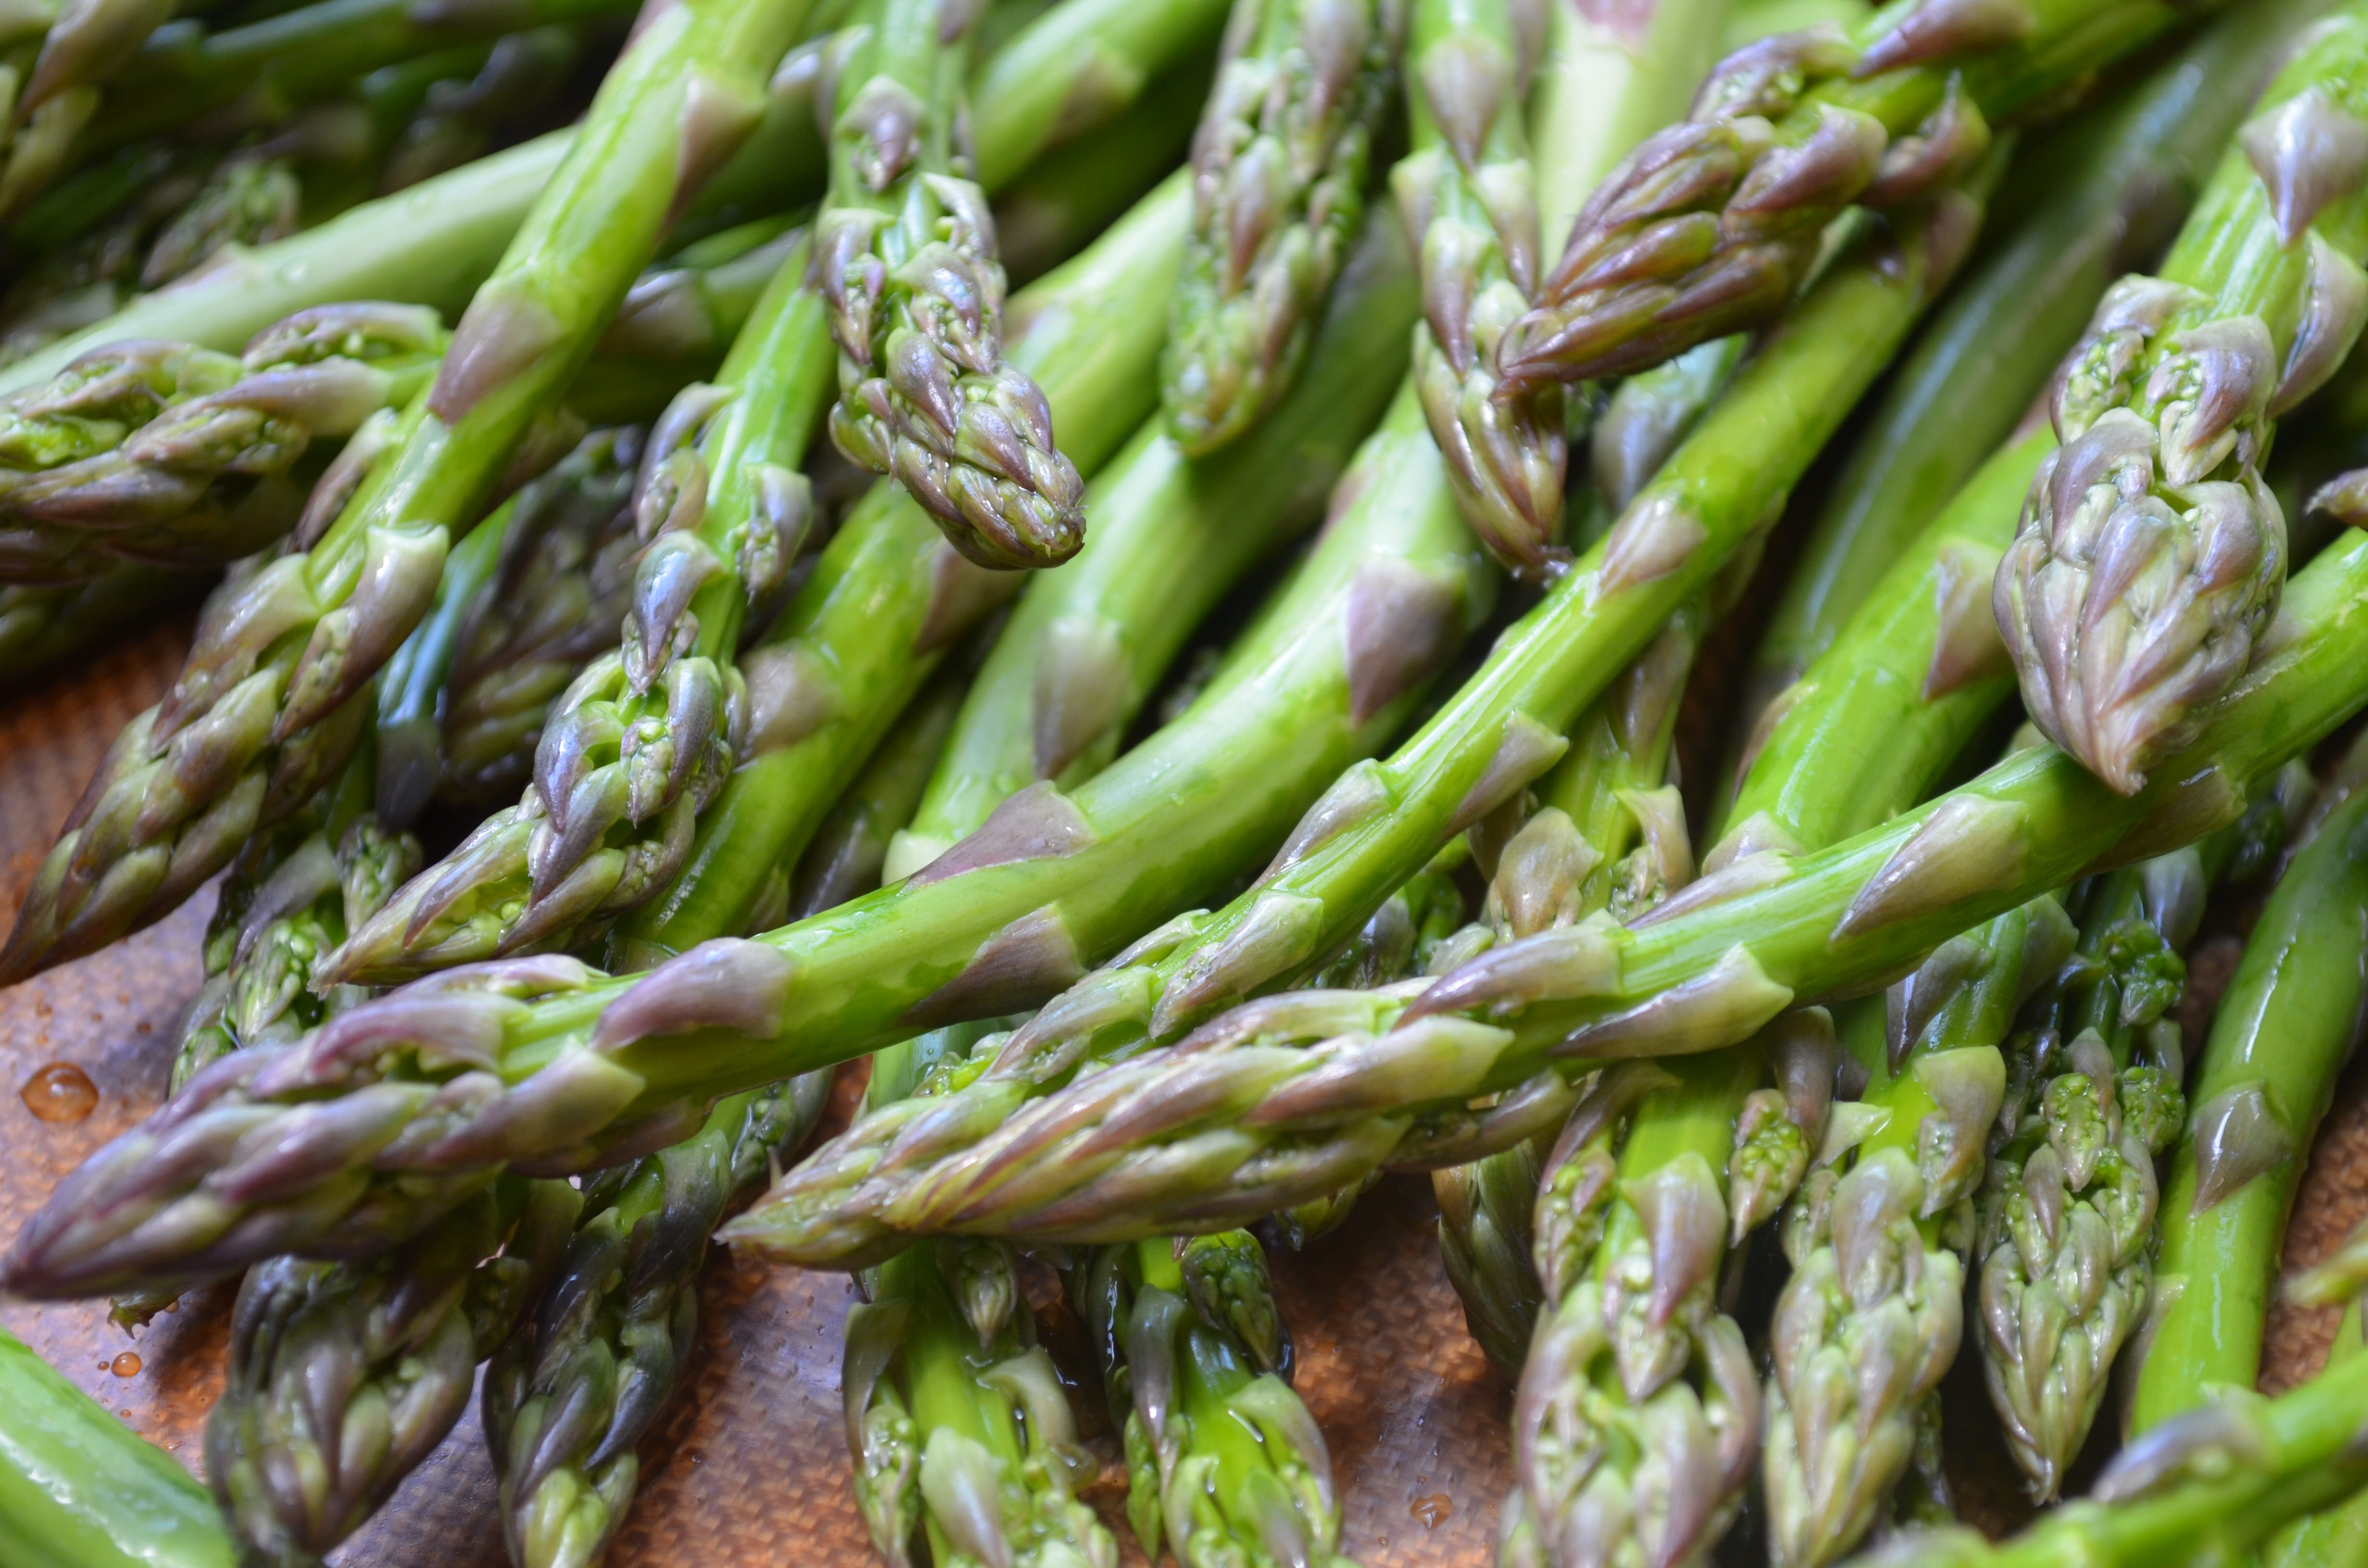 How to cook asparagus on www.virginiawillis.com